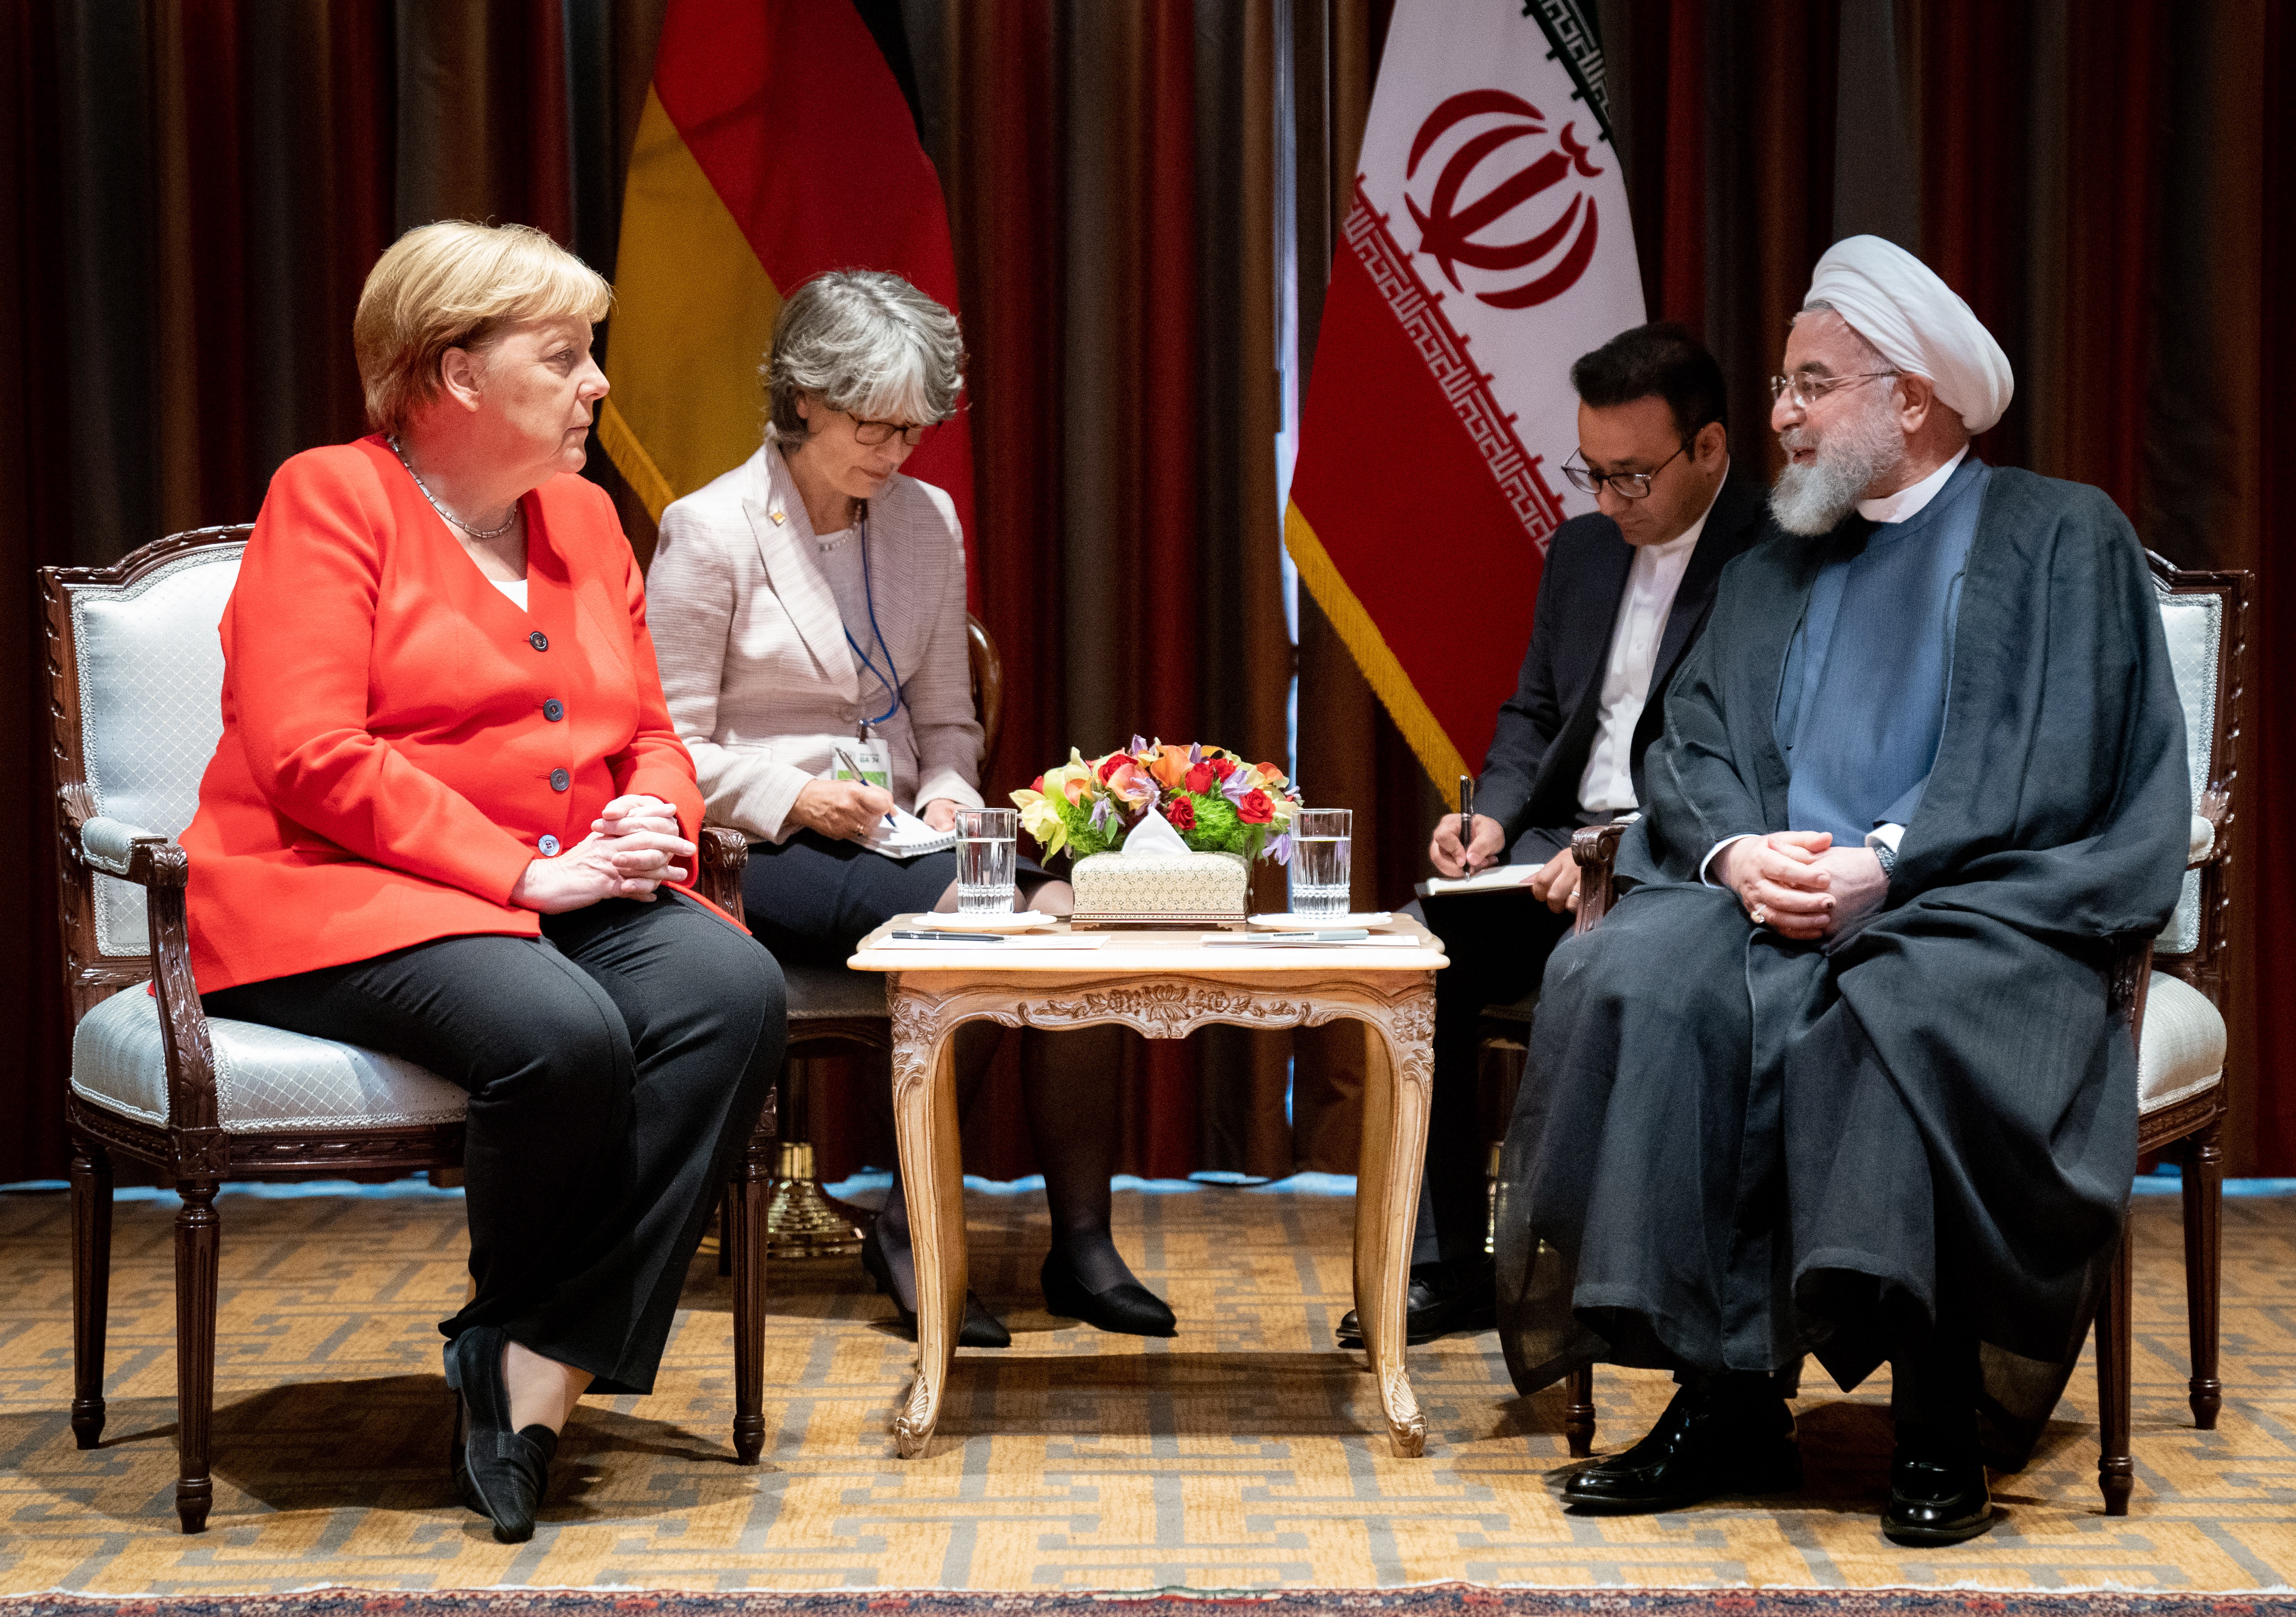 epa07866772 German Chancellor Angela Merkel (L) meets President of Iran Hassan Rouhani during their meeting on the sidelines of the general debate of the 74th session of the General Assembly of the United Nations at United Nations Headquarters in New York, New York, USA, 24 September 2019.  EPA/KAY NIETFELD / POOL